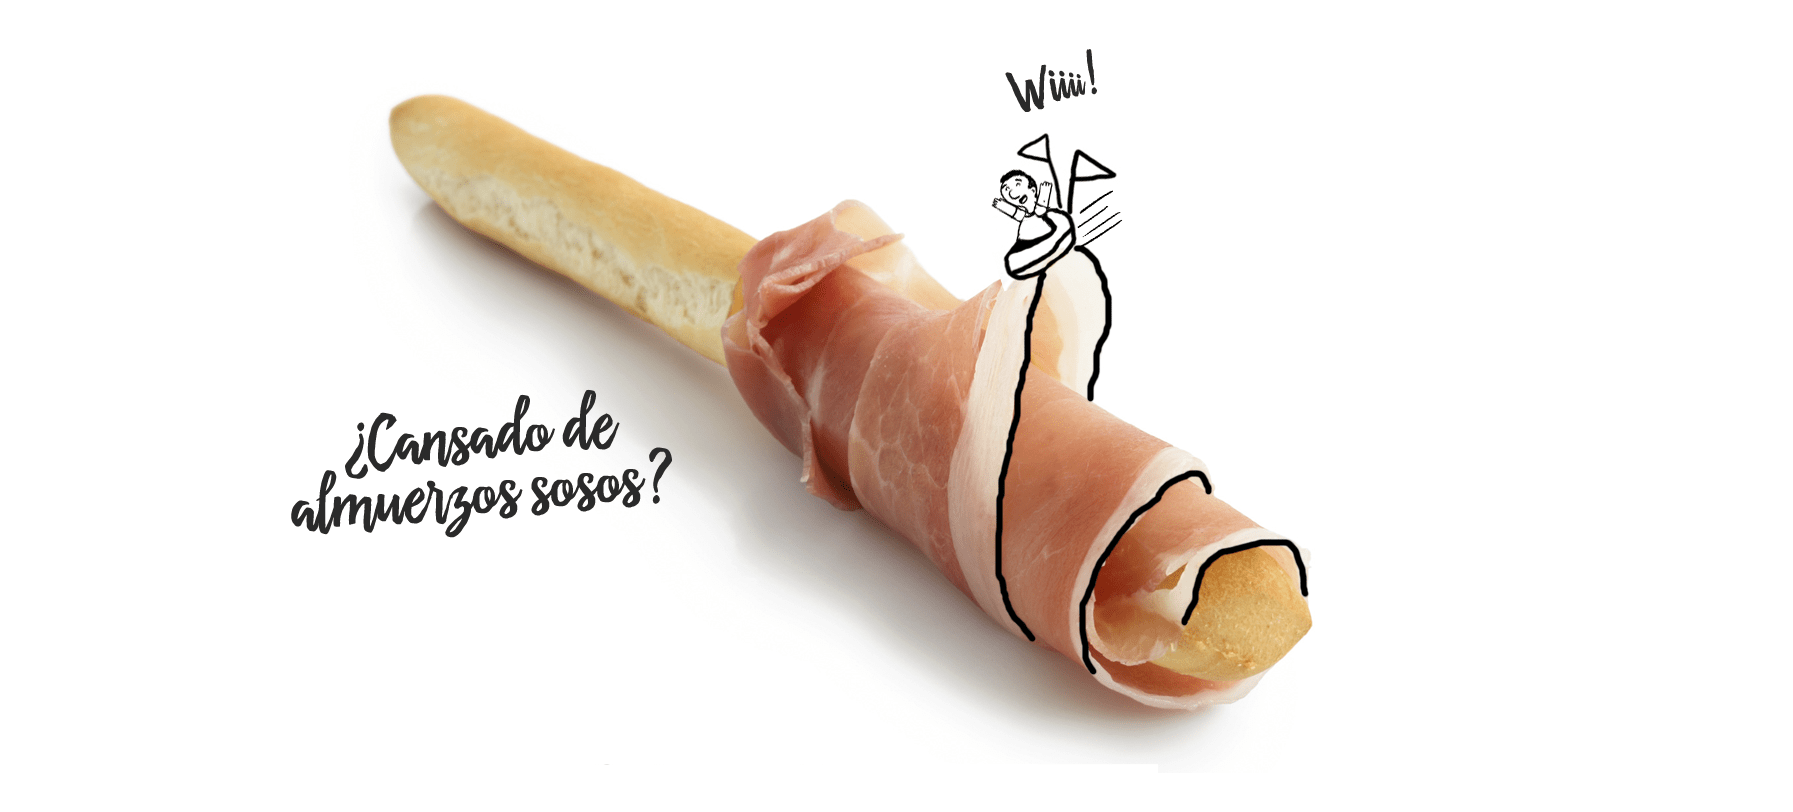 Some curiosities about the serrano ham